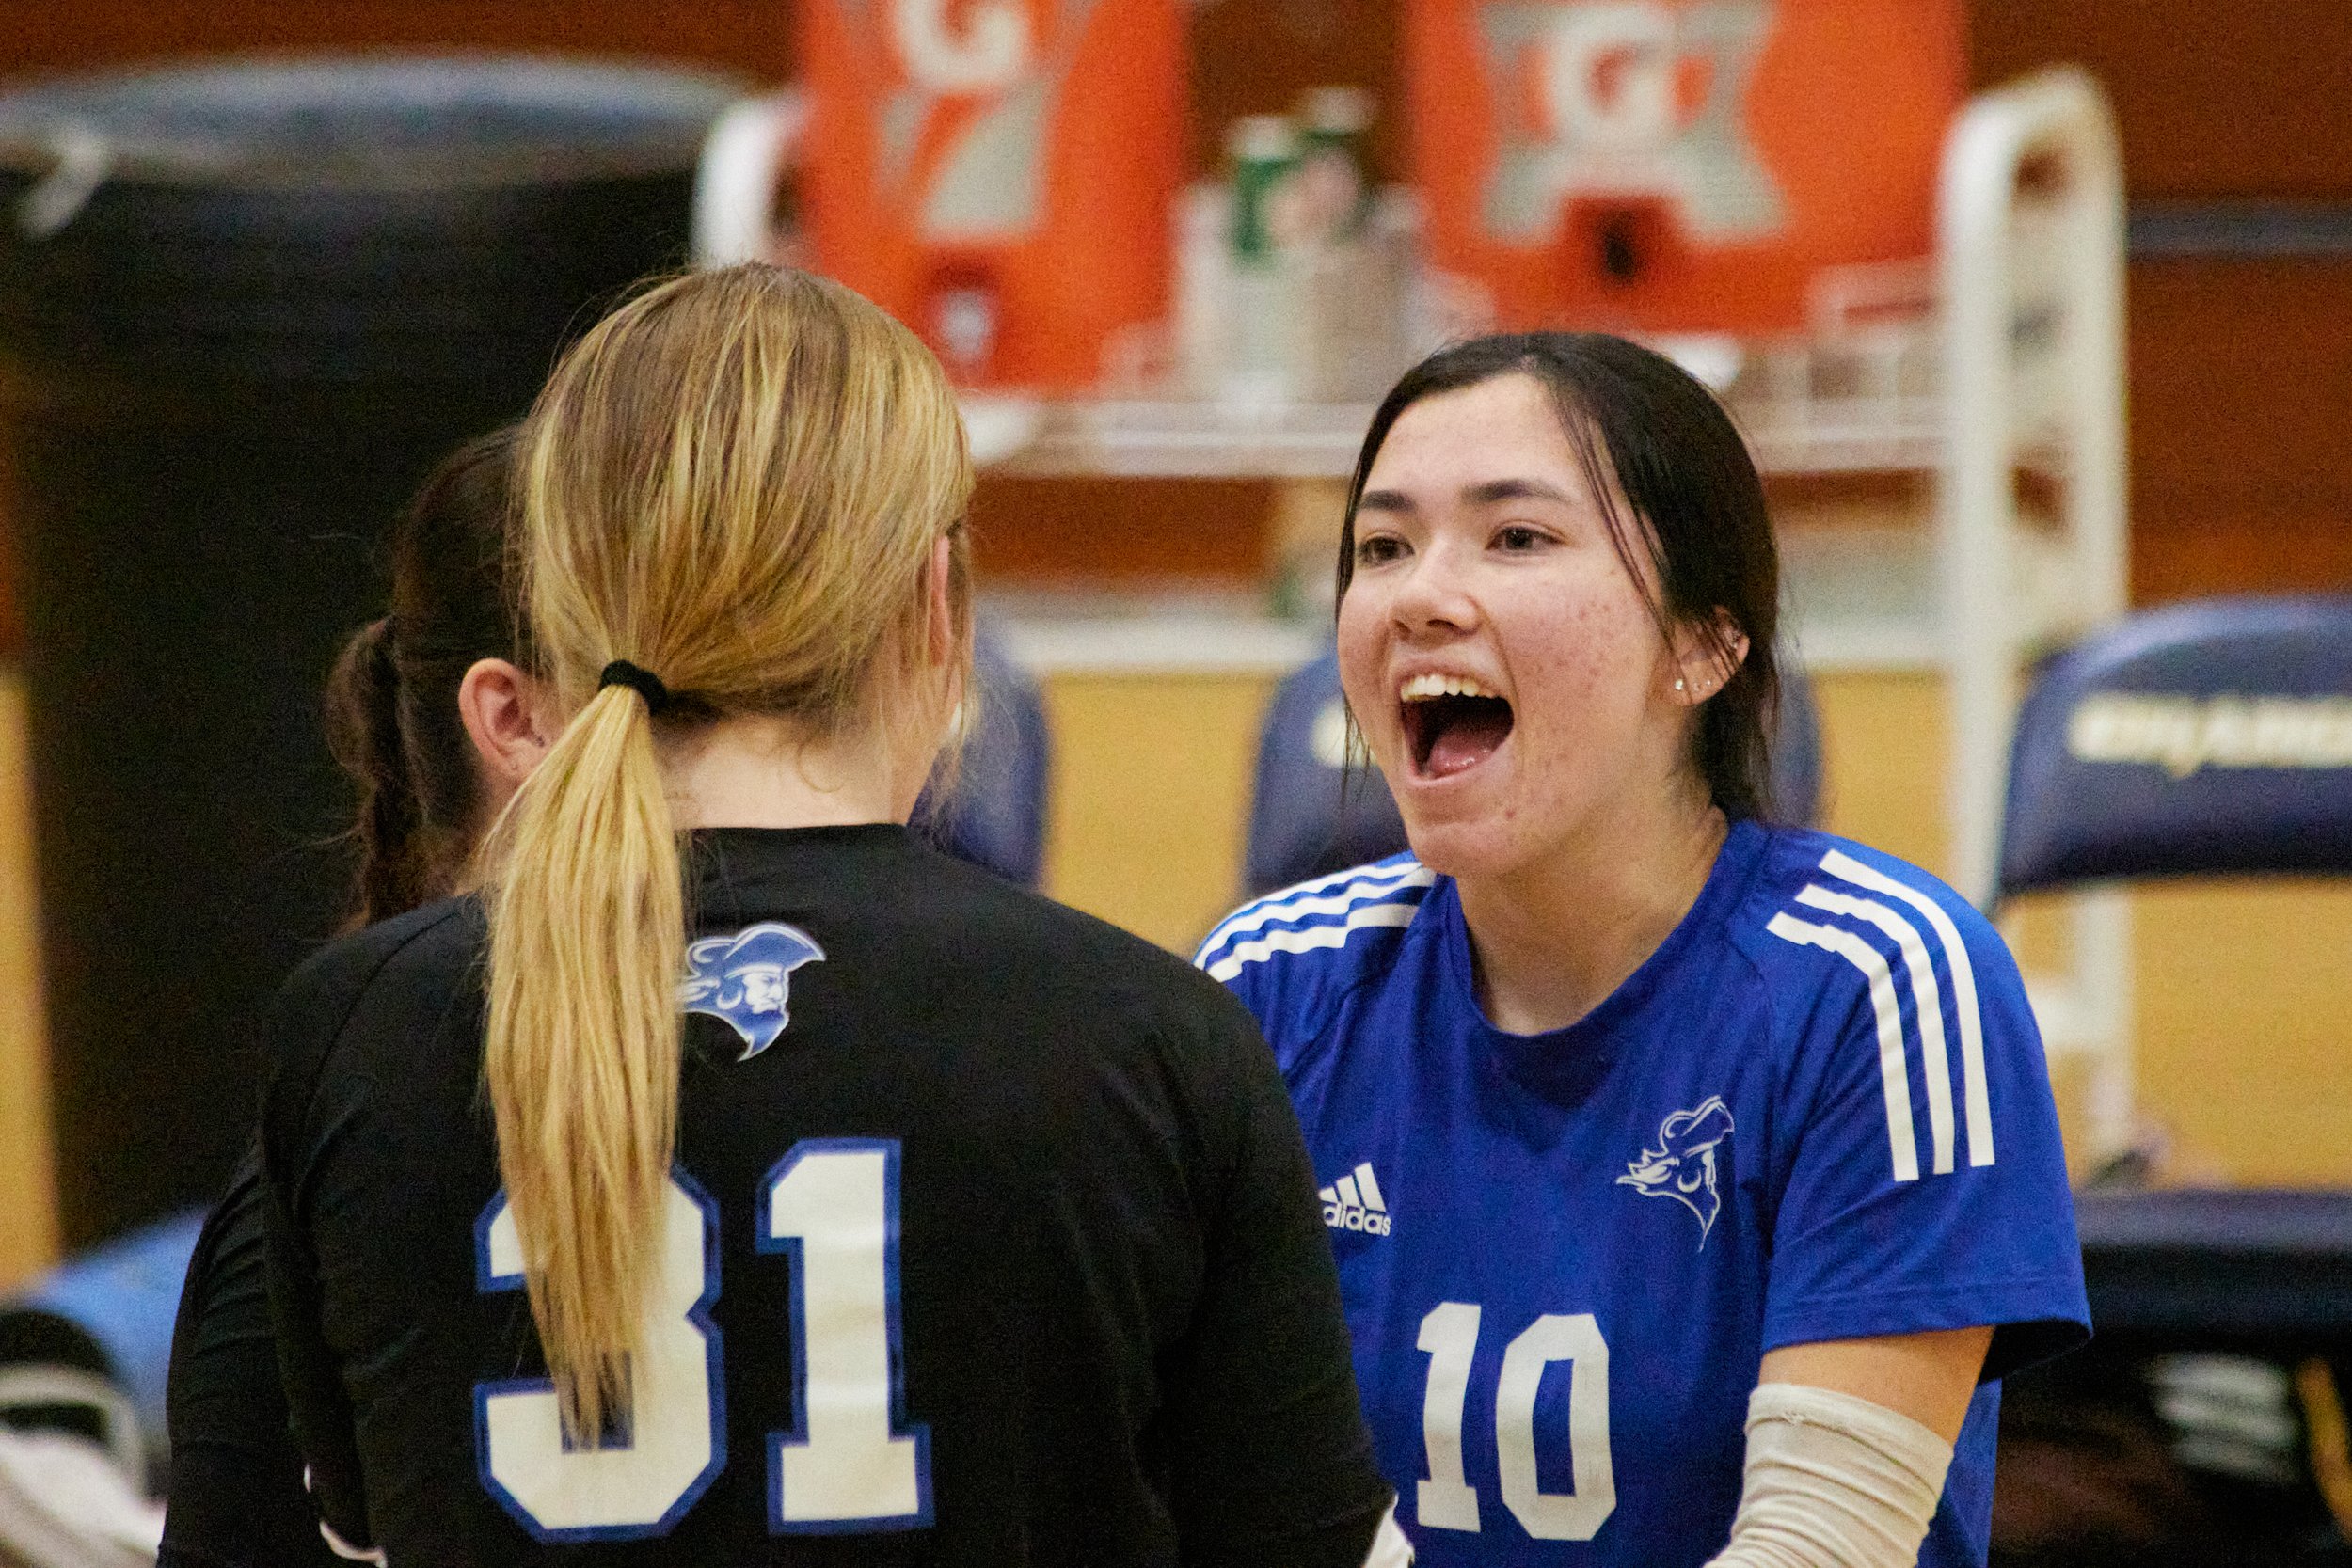  Santa Monica College Corsairs setter Sophia Odle (right) with middle blocker Mylah Niksa (front) and outside hitter Nataliie Fernandez (back) during the women's volleyball match against Cypress College Chargers at Cypress College Gymnasium number 2,